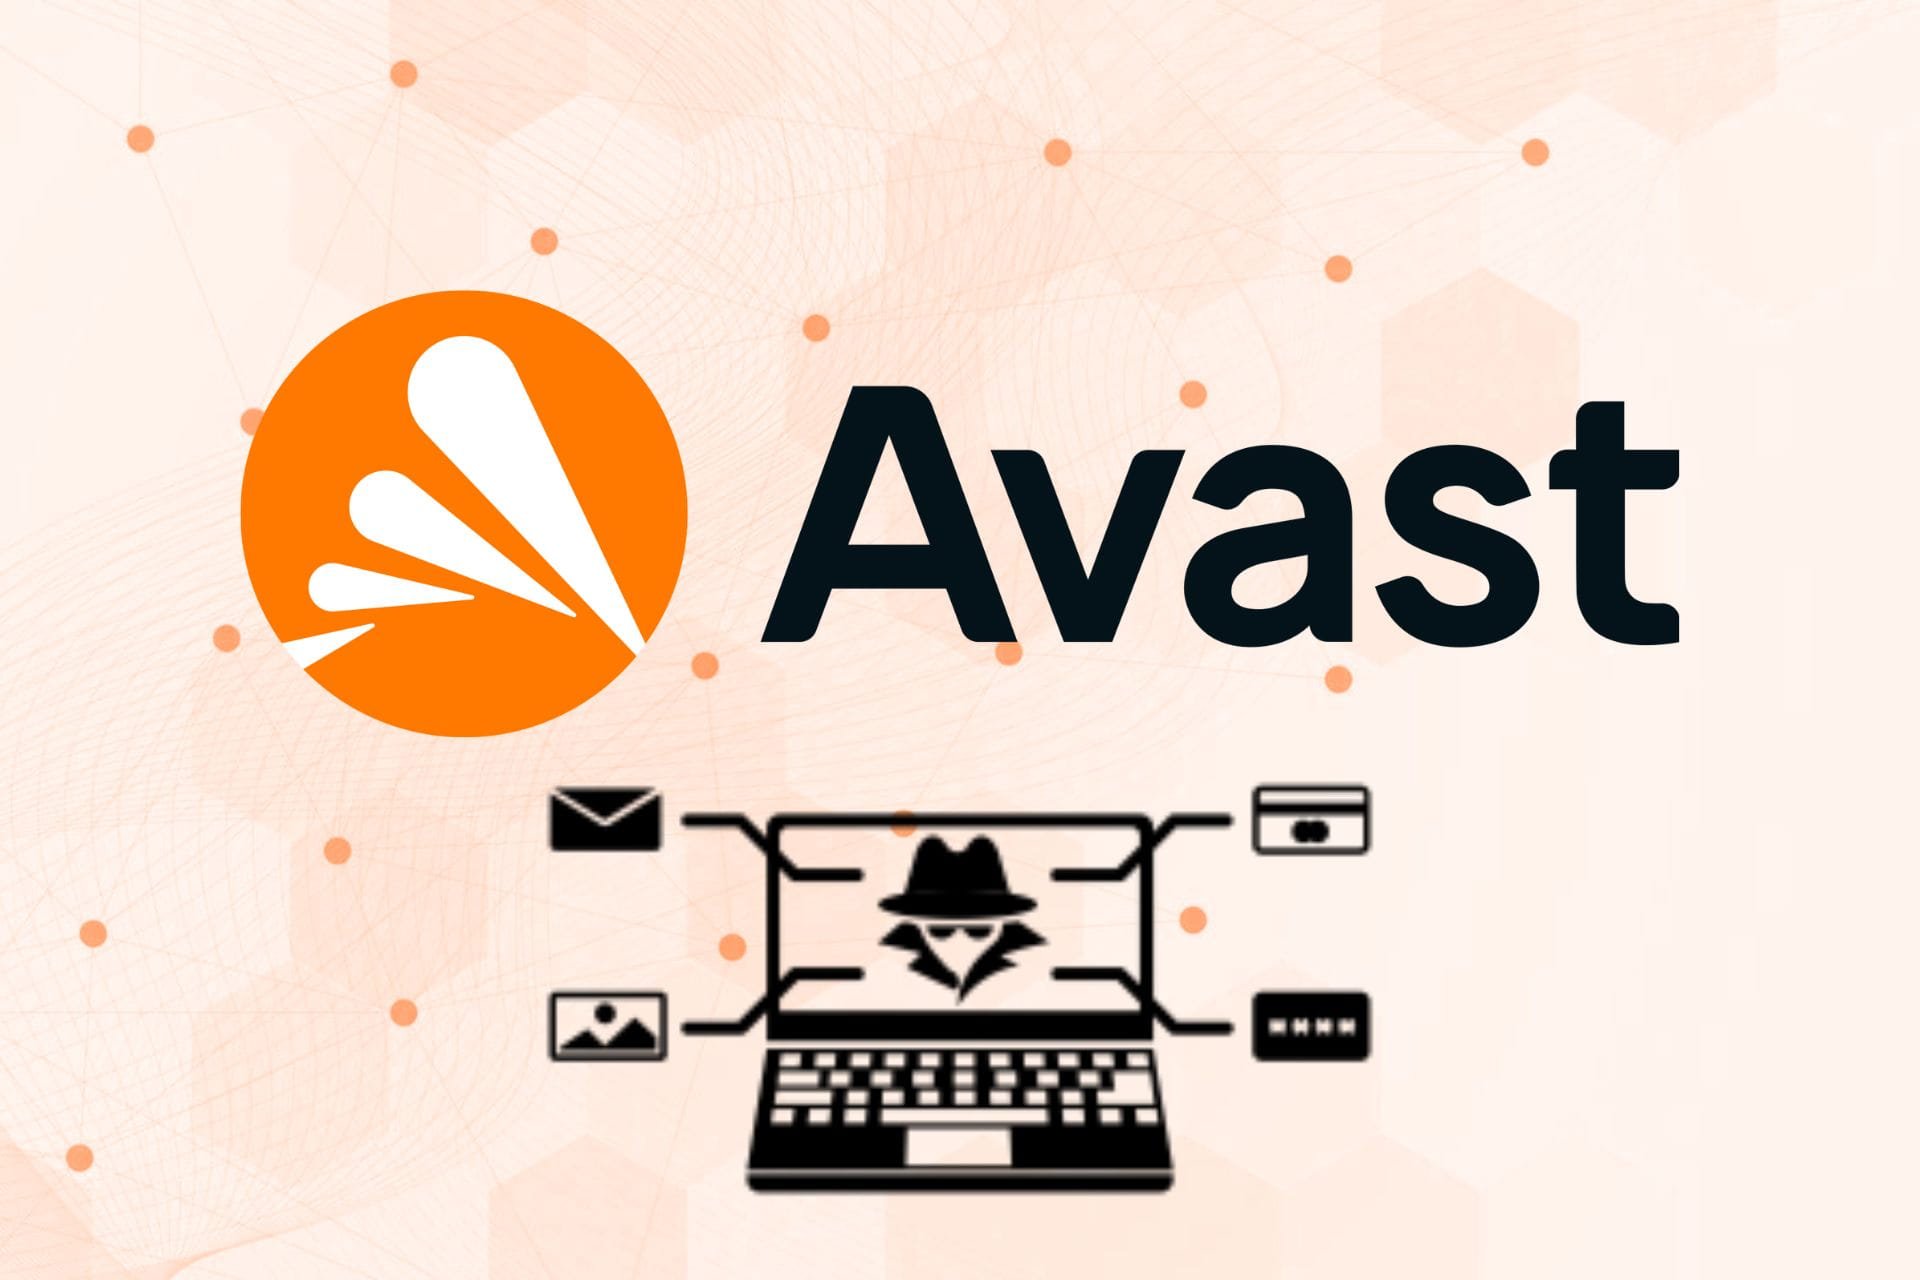 Avast next to a symbol of data stealing